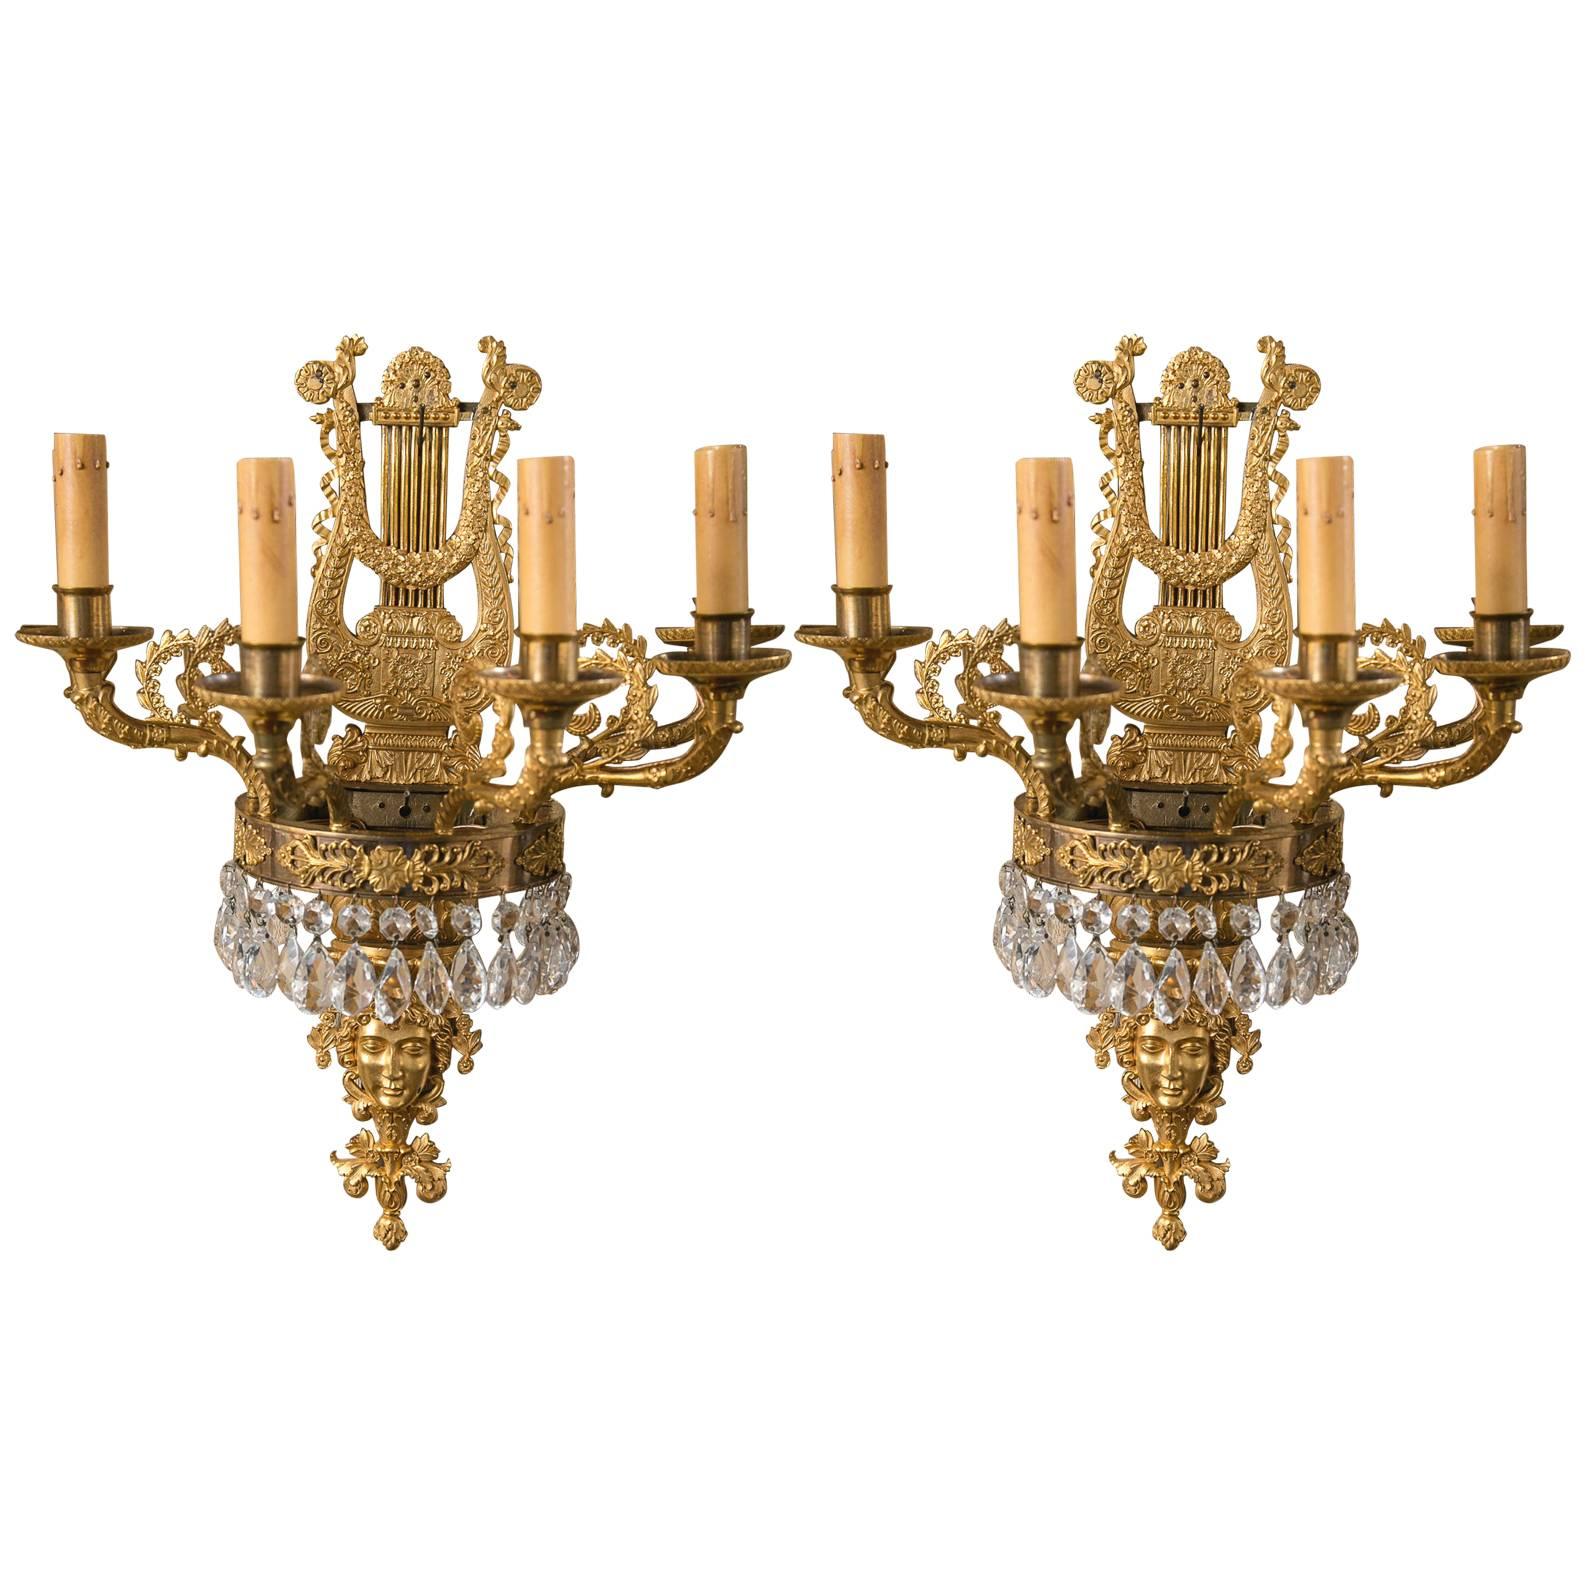 Beautiful Pair of Gilt Bronze and Crystal Drops Six-Light Sconces For Sale